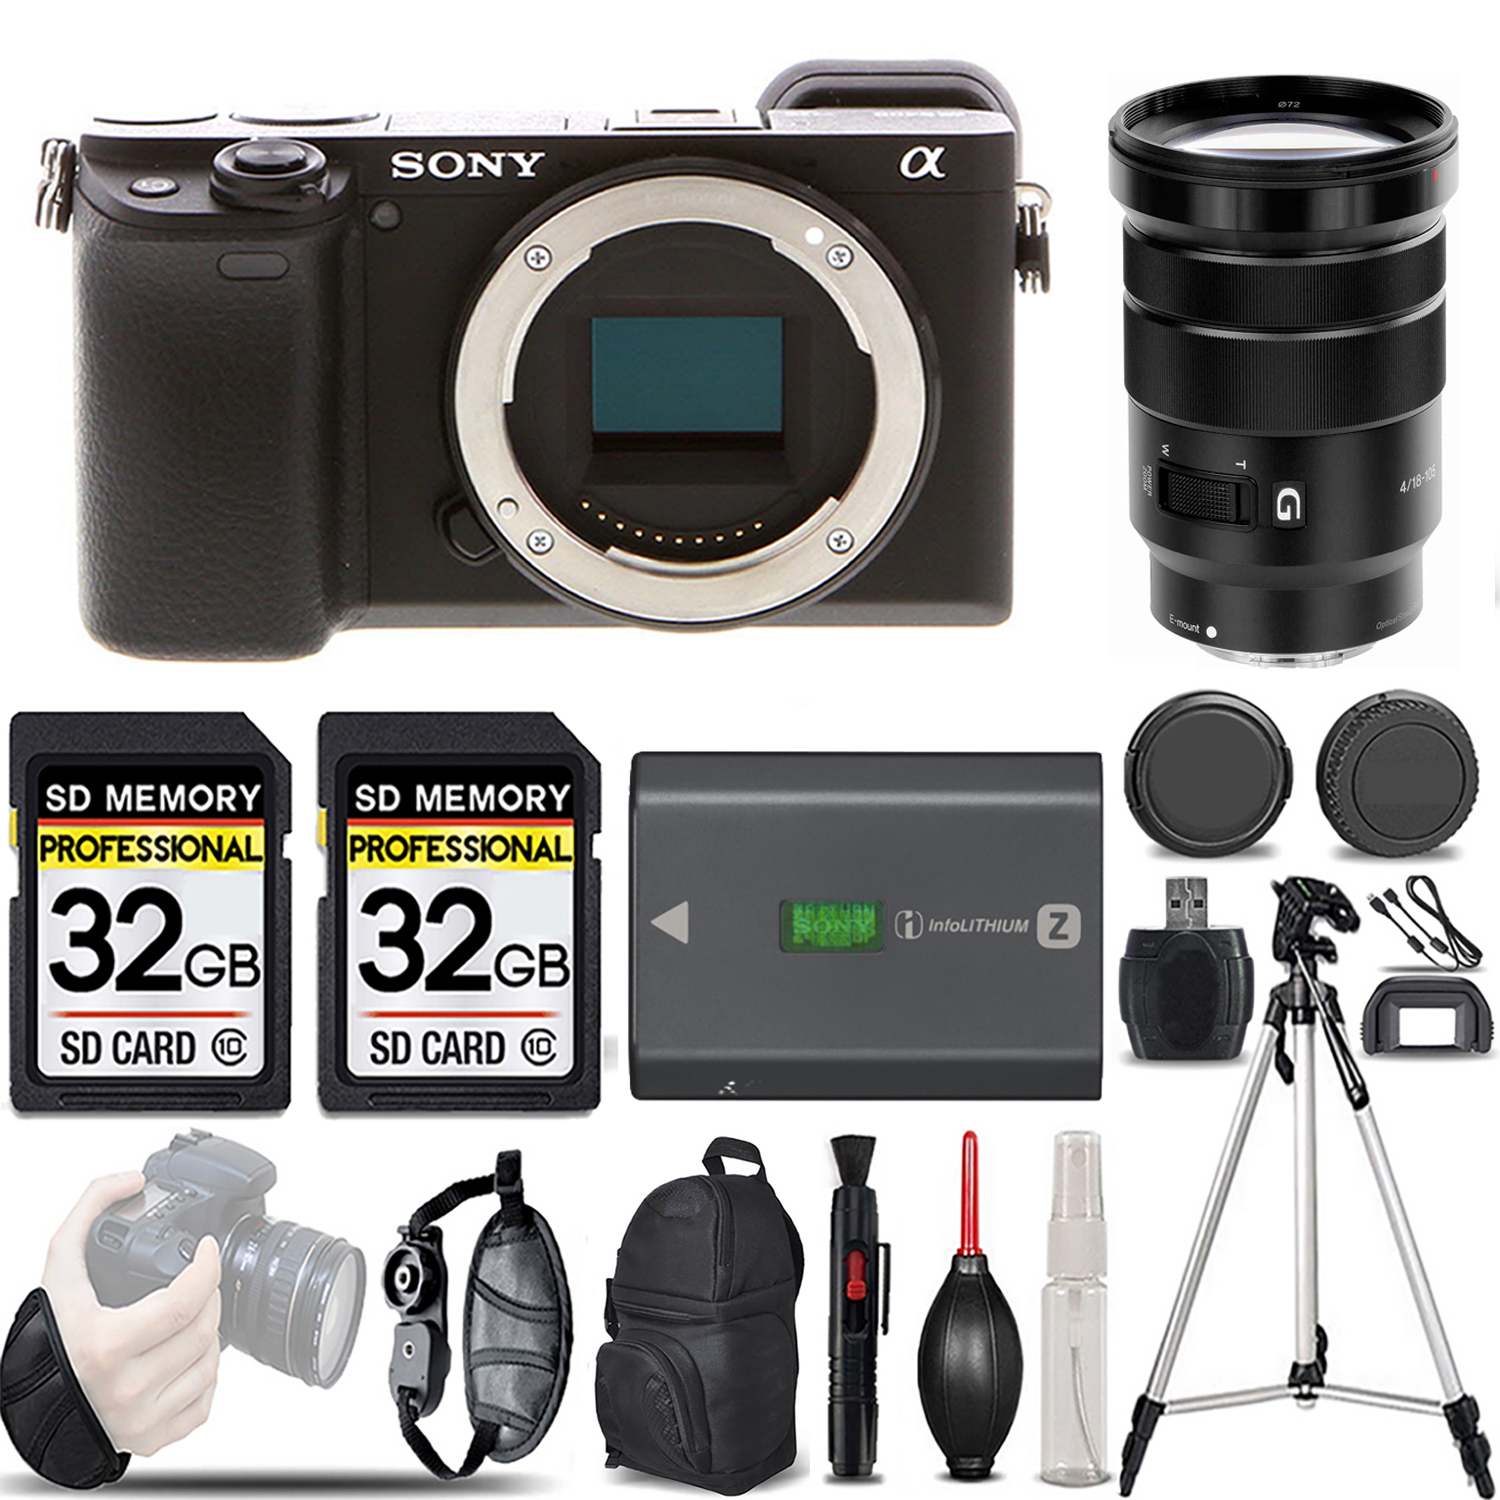 a6400 Mirrorless Camera + 18-105mm f/4 G OSS Lens - LOADED KIT (ILCE-6400/B) *FREE SHIPPING*